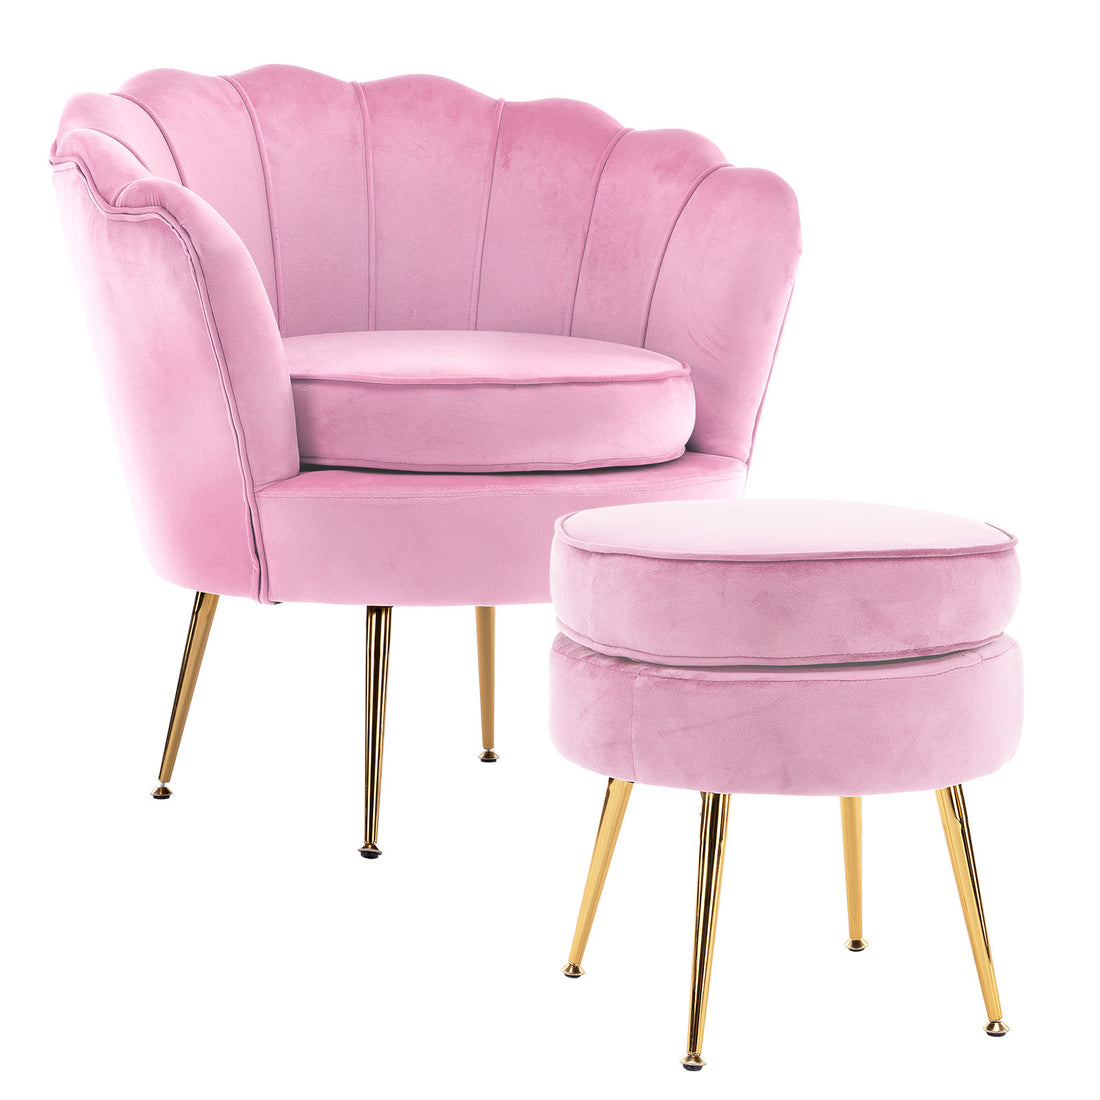 La Bella Shell Scallop Pink Armchair Accent Chair Velvet + Round Ottoman Footstool-Armchairs-PEROZ Accessories